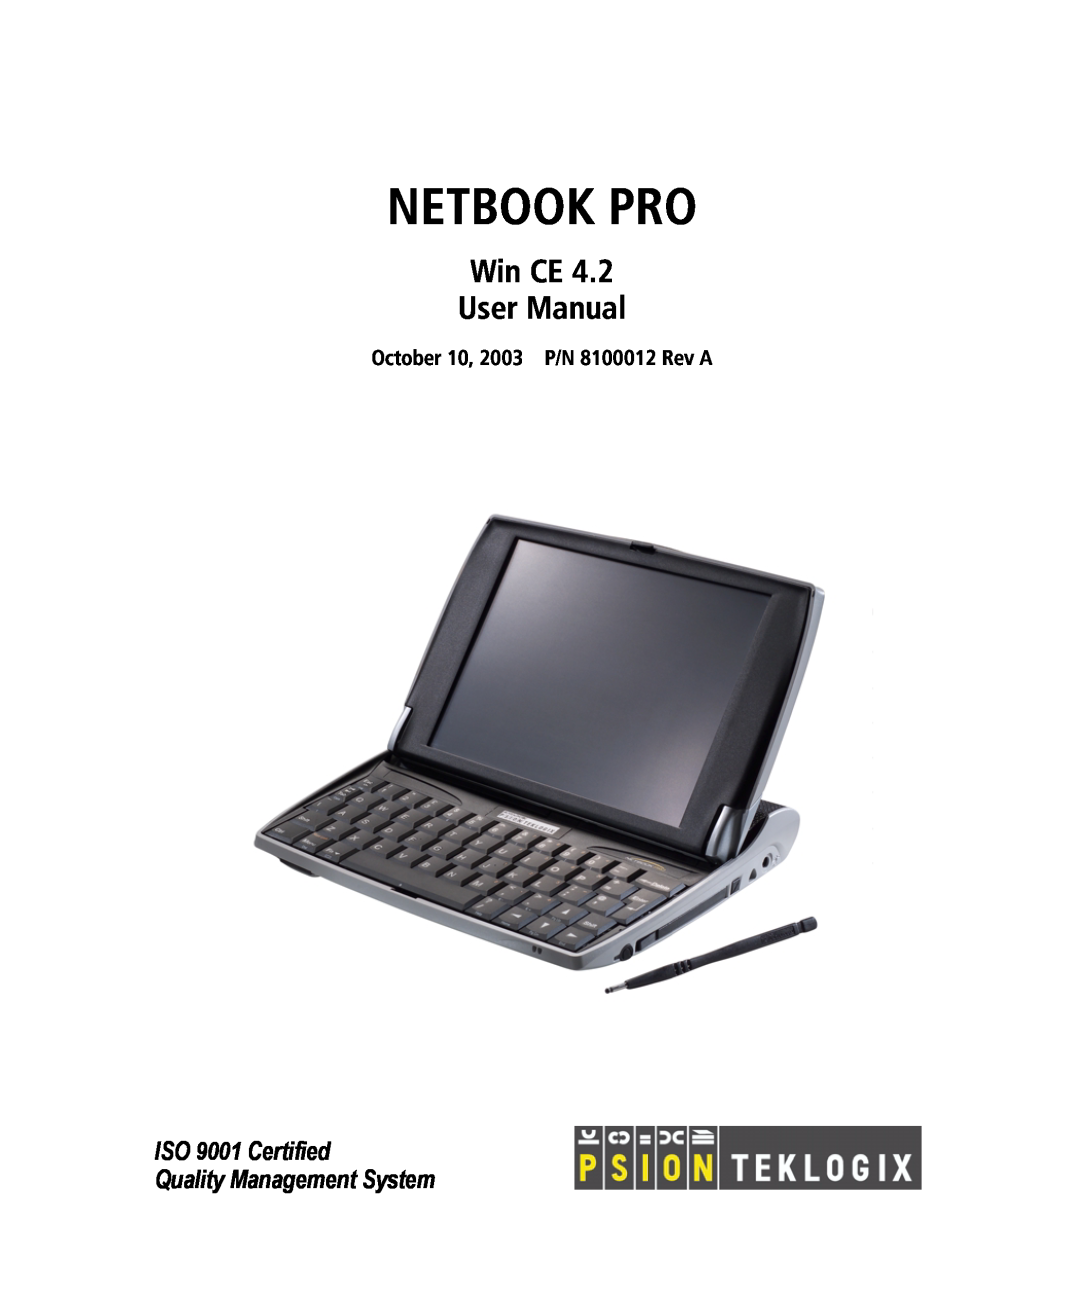 Psion Teklogix Win CE 4.2 user manual Netbook Pro, Win CE User Manual, ISO 9001 Certified Quality Management System 